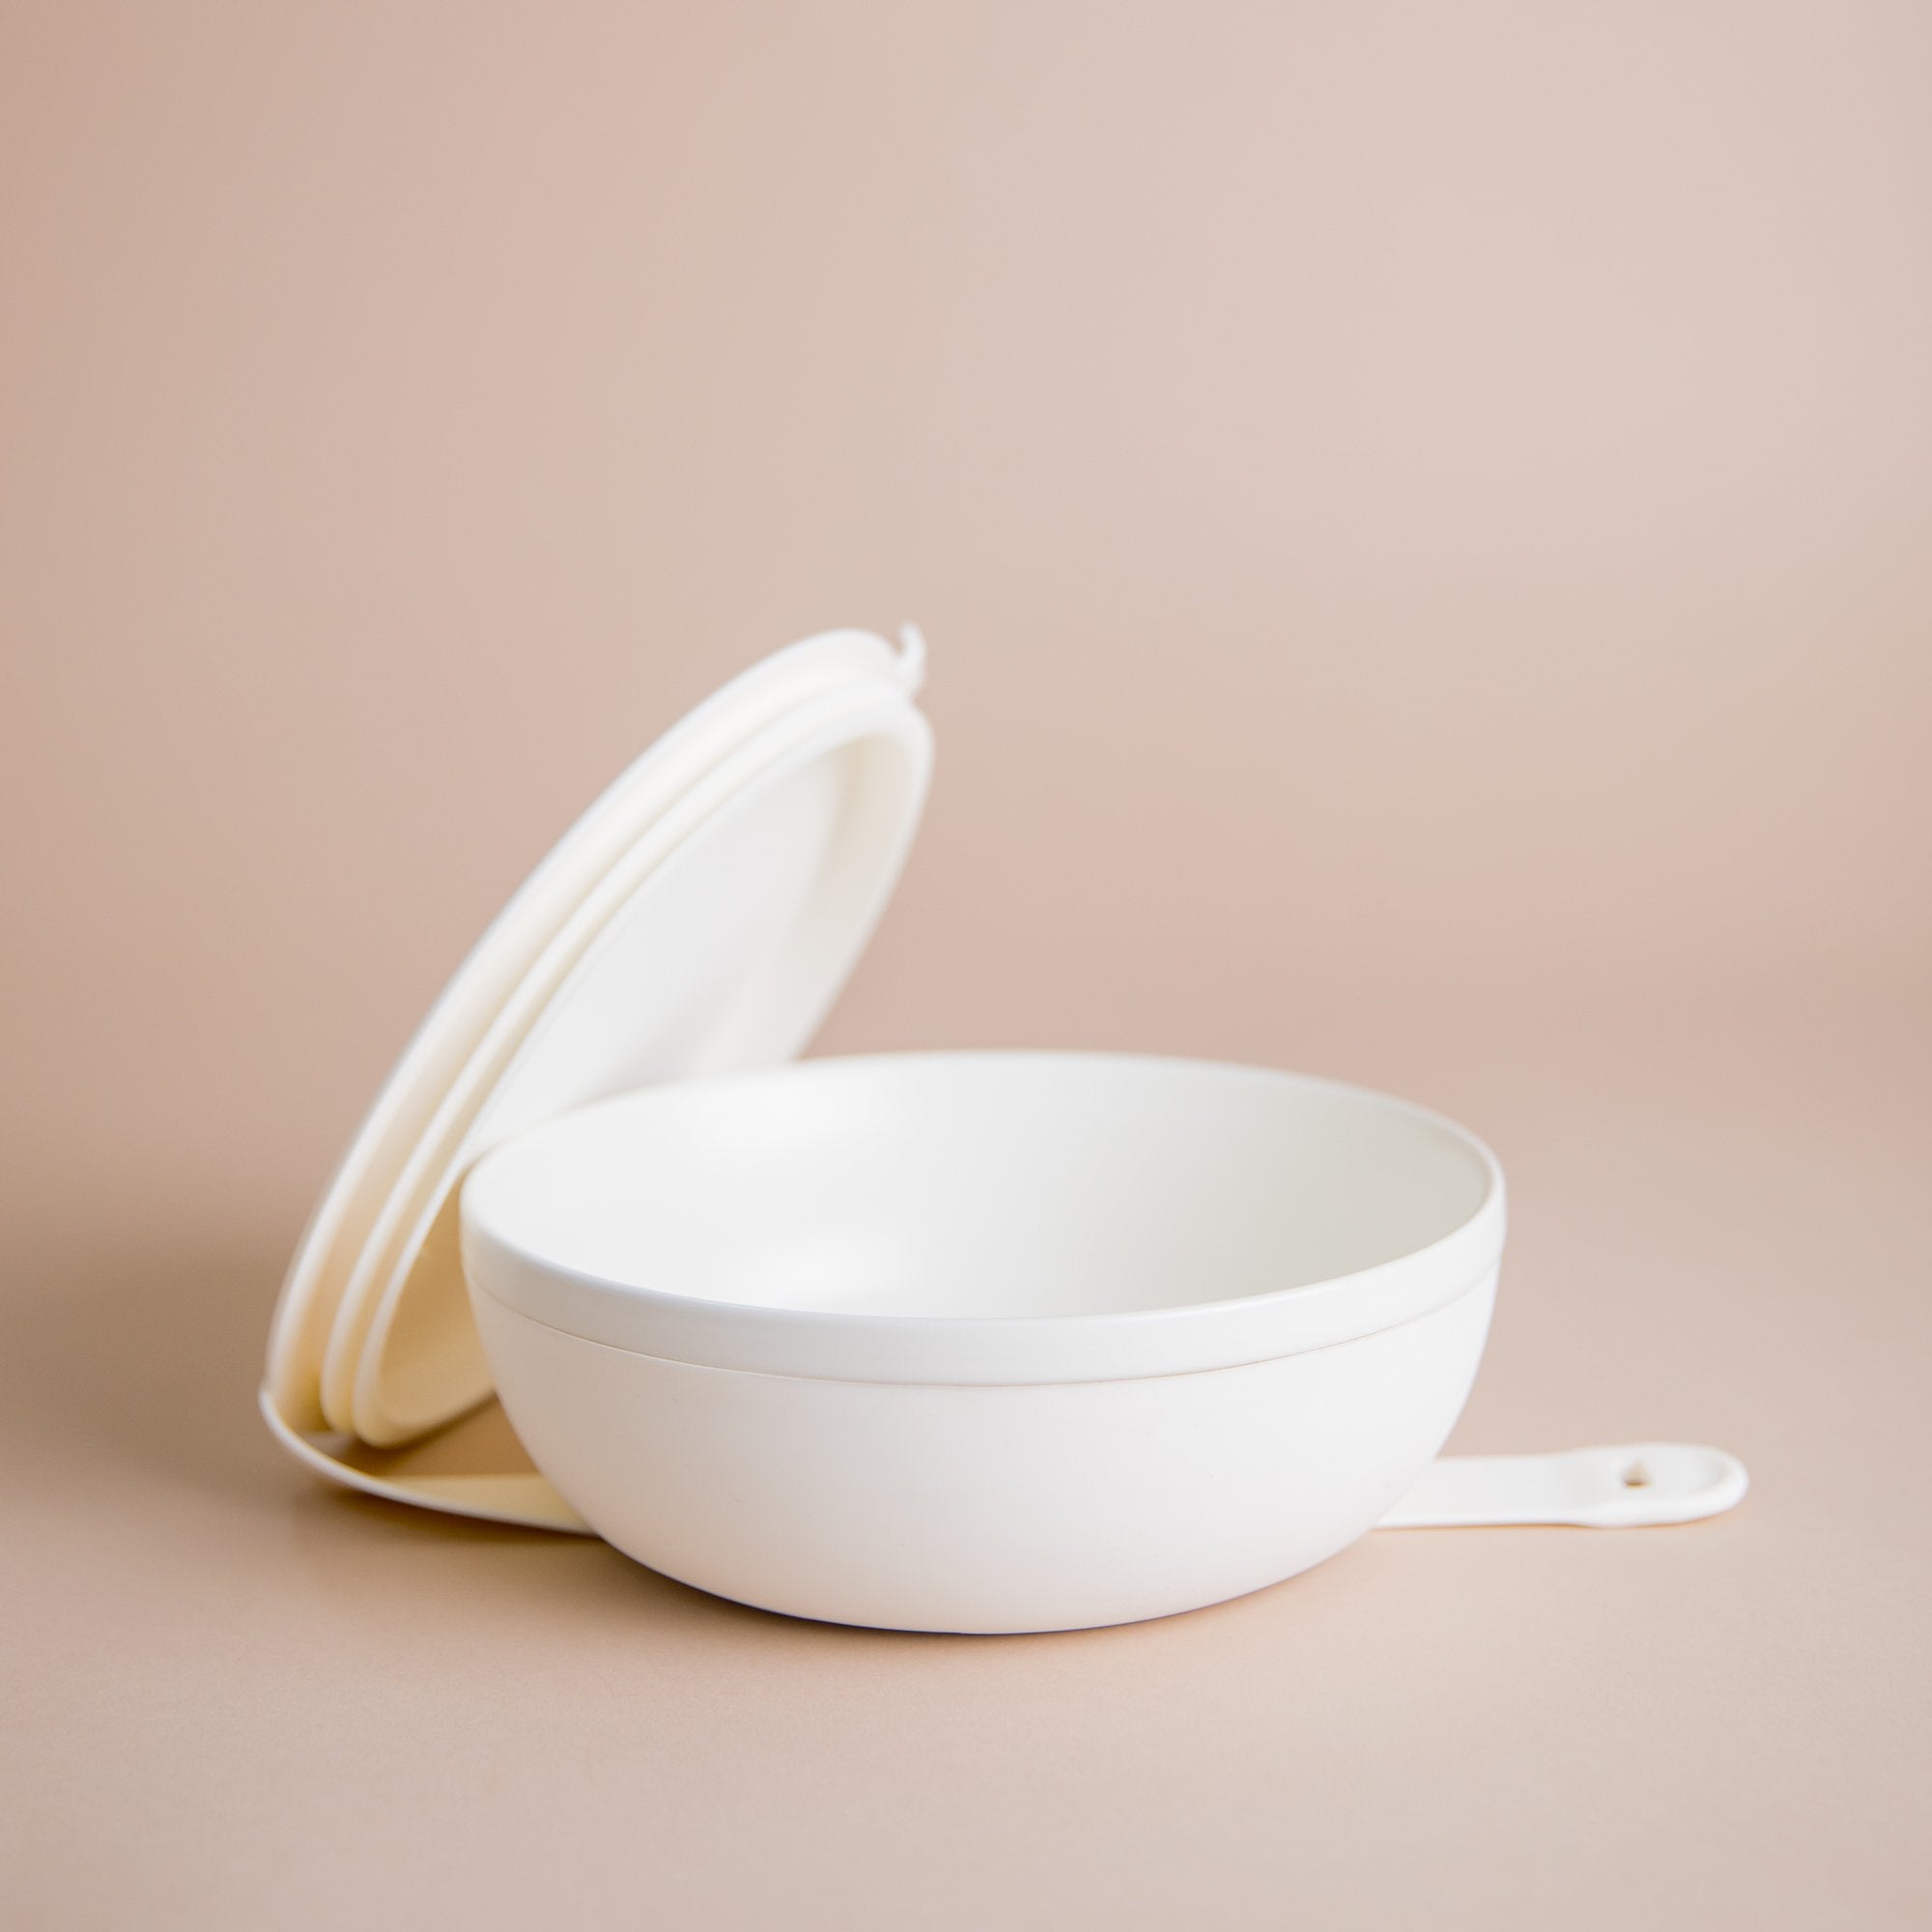 Portable Lunch Bowl by W&P Design in Brooklyn, New York